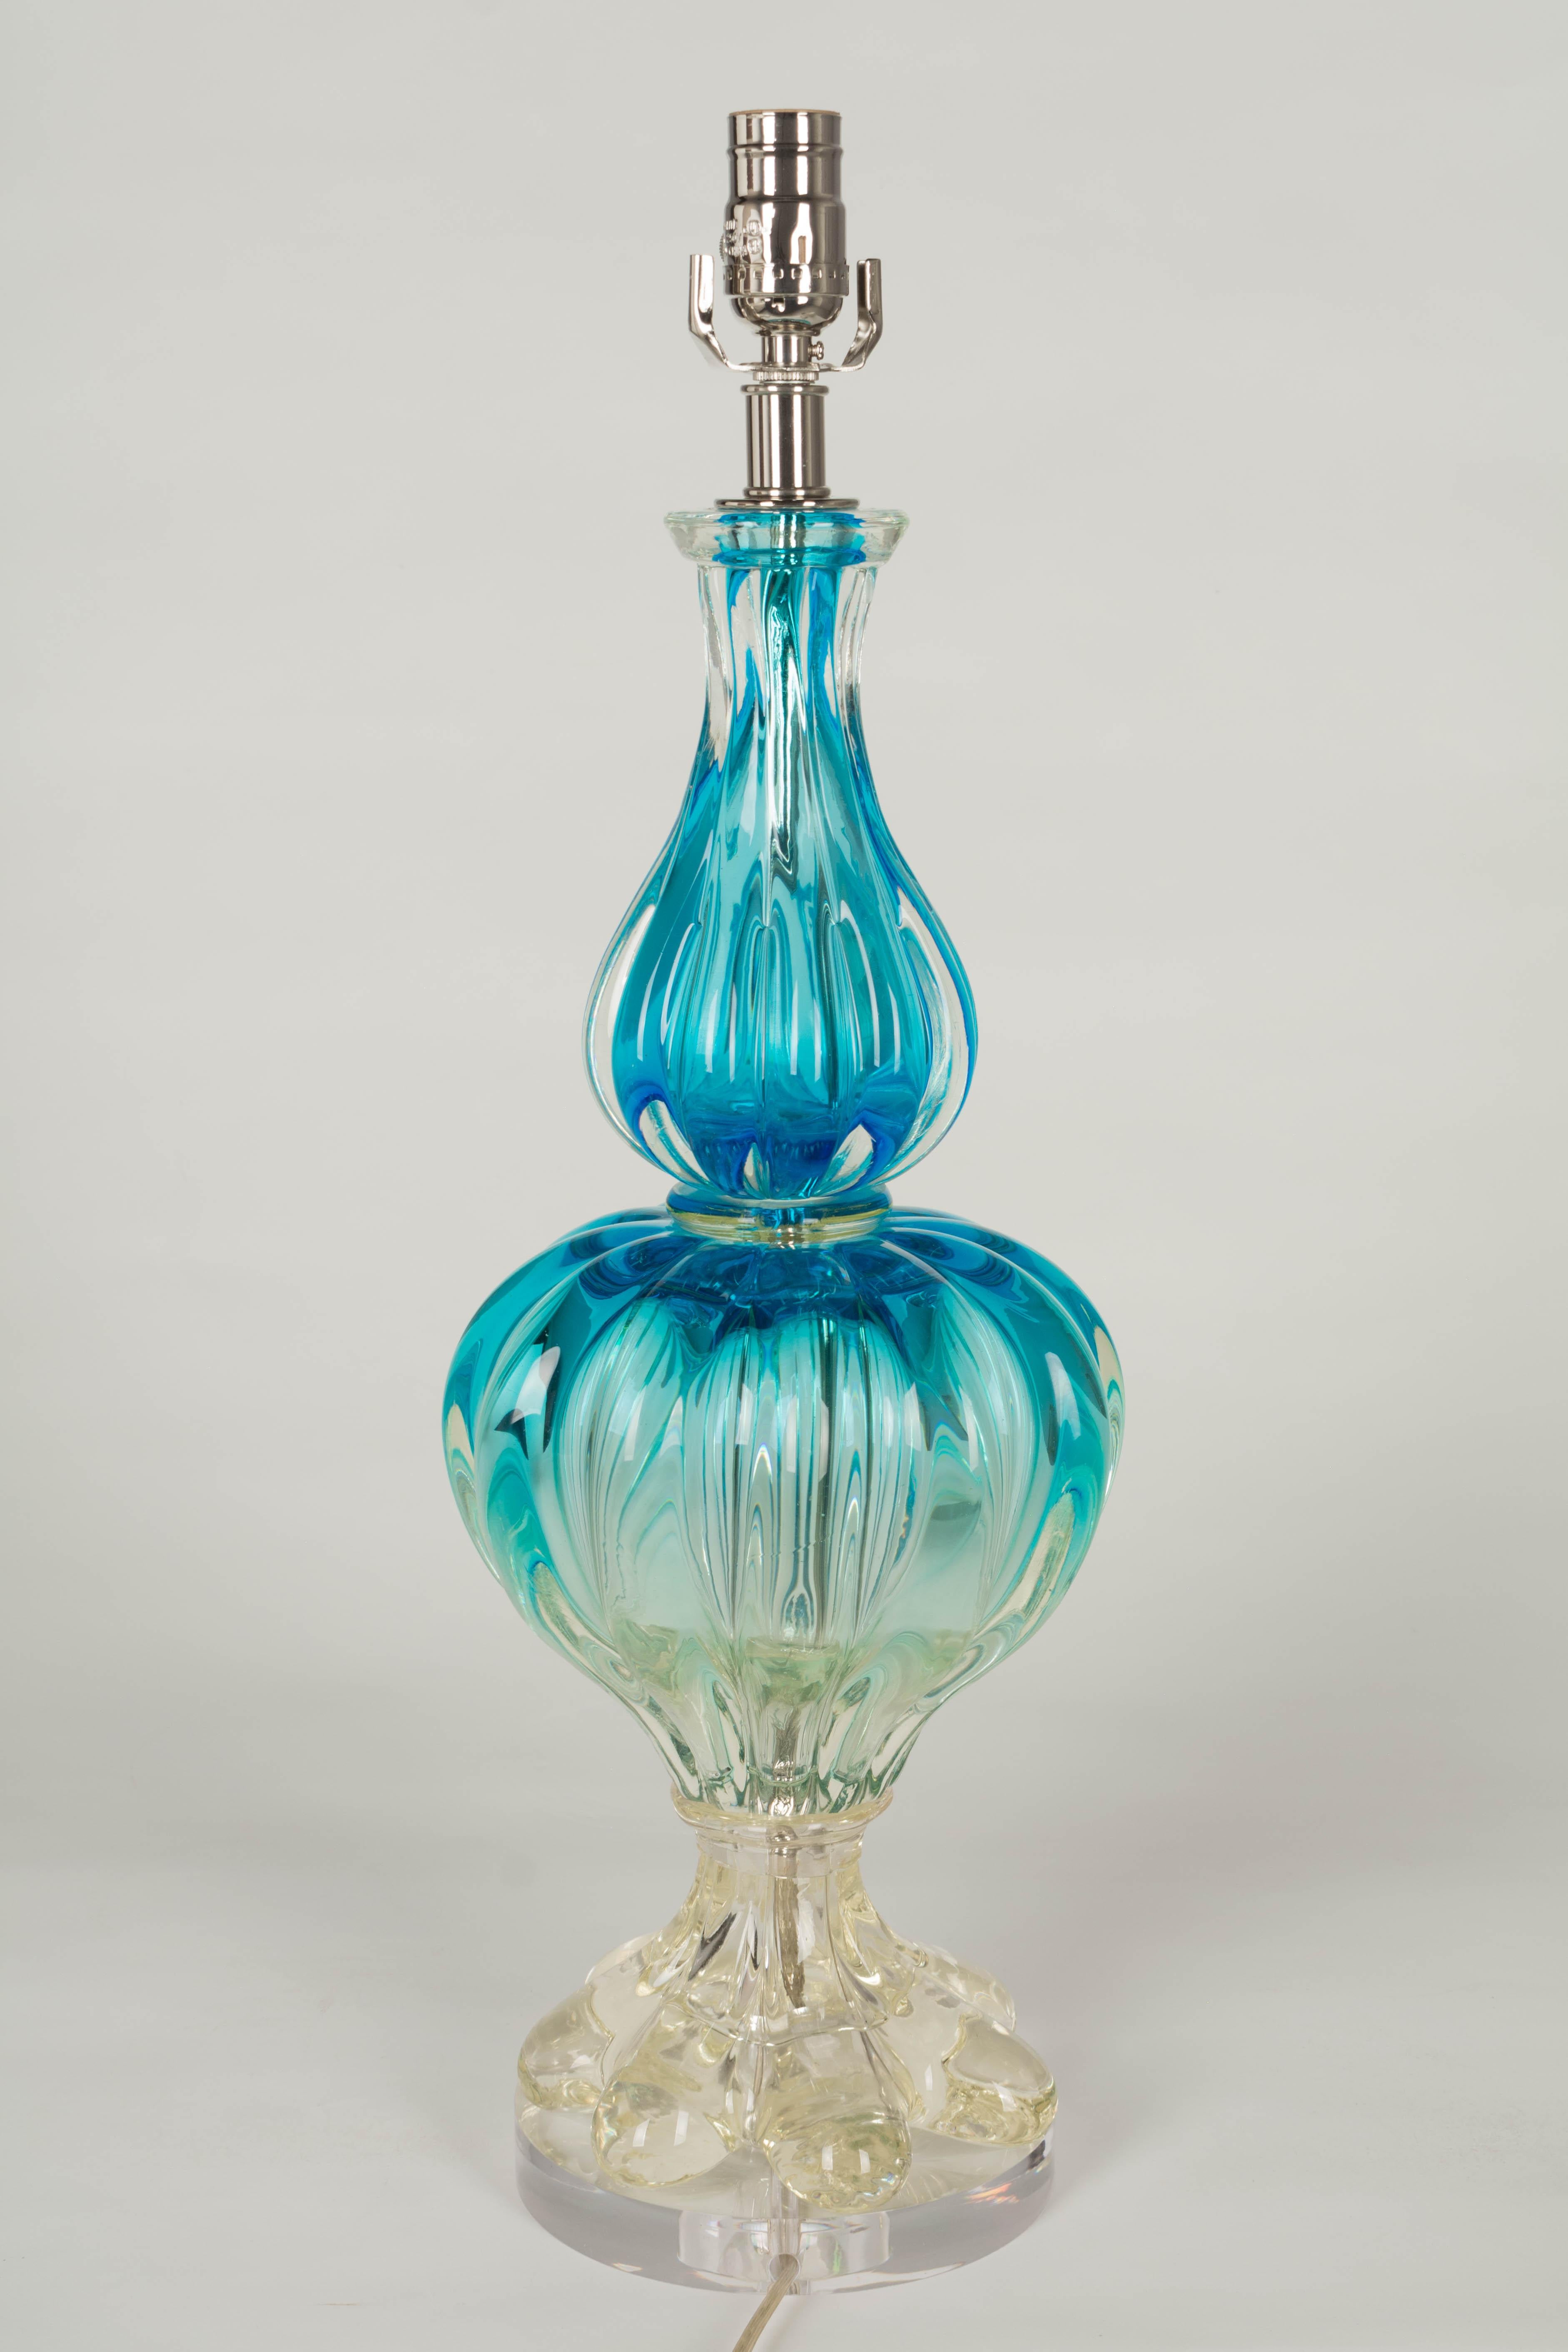 Midcentury Seguso Murano Glass Lamp In Good Condition For Sale In Winter Park, FL